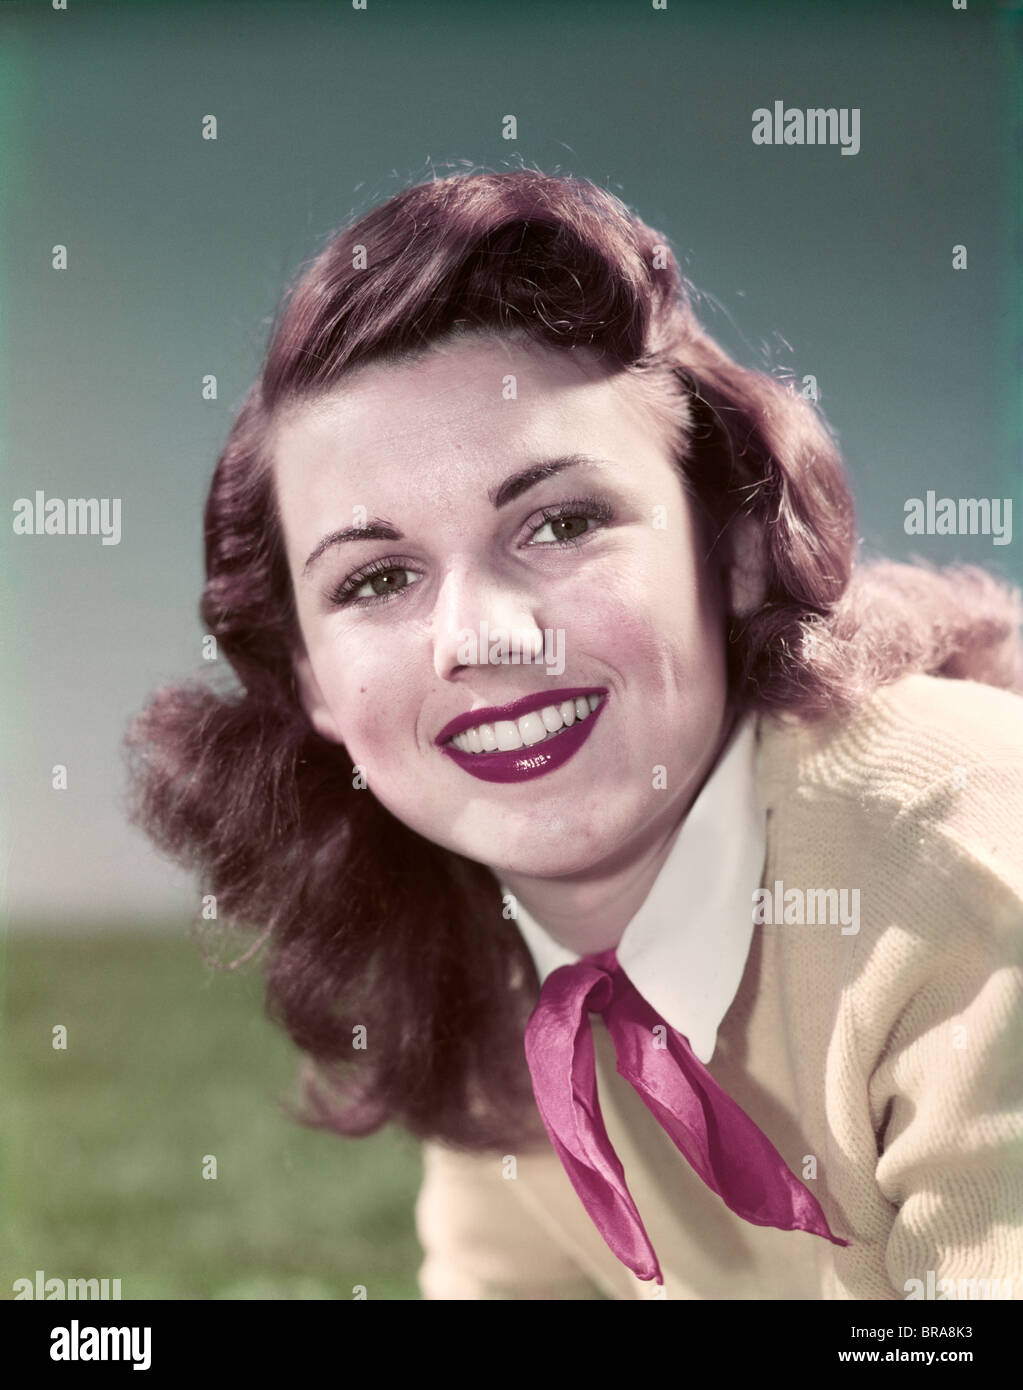 Années 1940 Années 1950 PORTRAIT SMILING TEEN GIRL WEARING SWEATER RED FOULARD cravate Banque D'Images